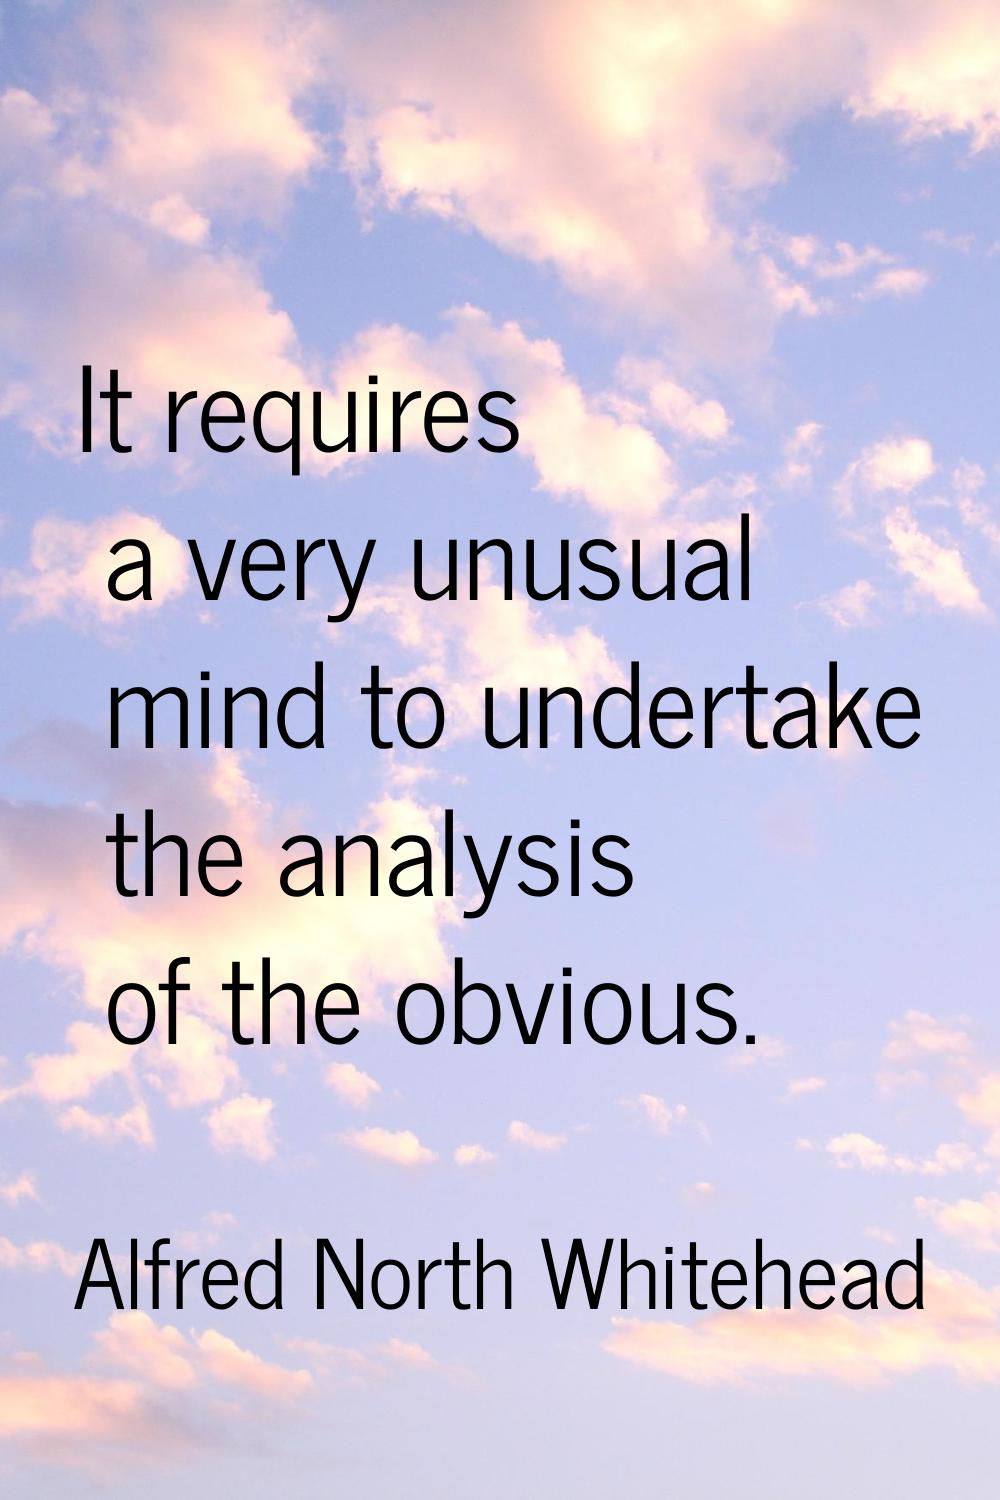 It requires a very unusual mind to undertake the analysis of the obvious.